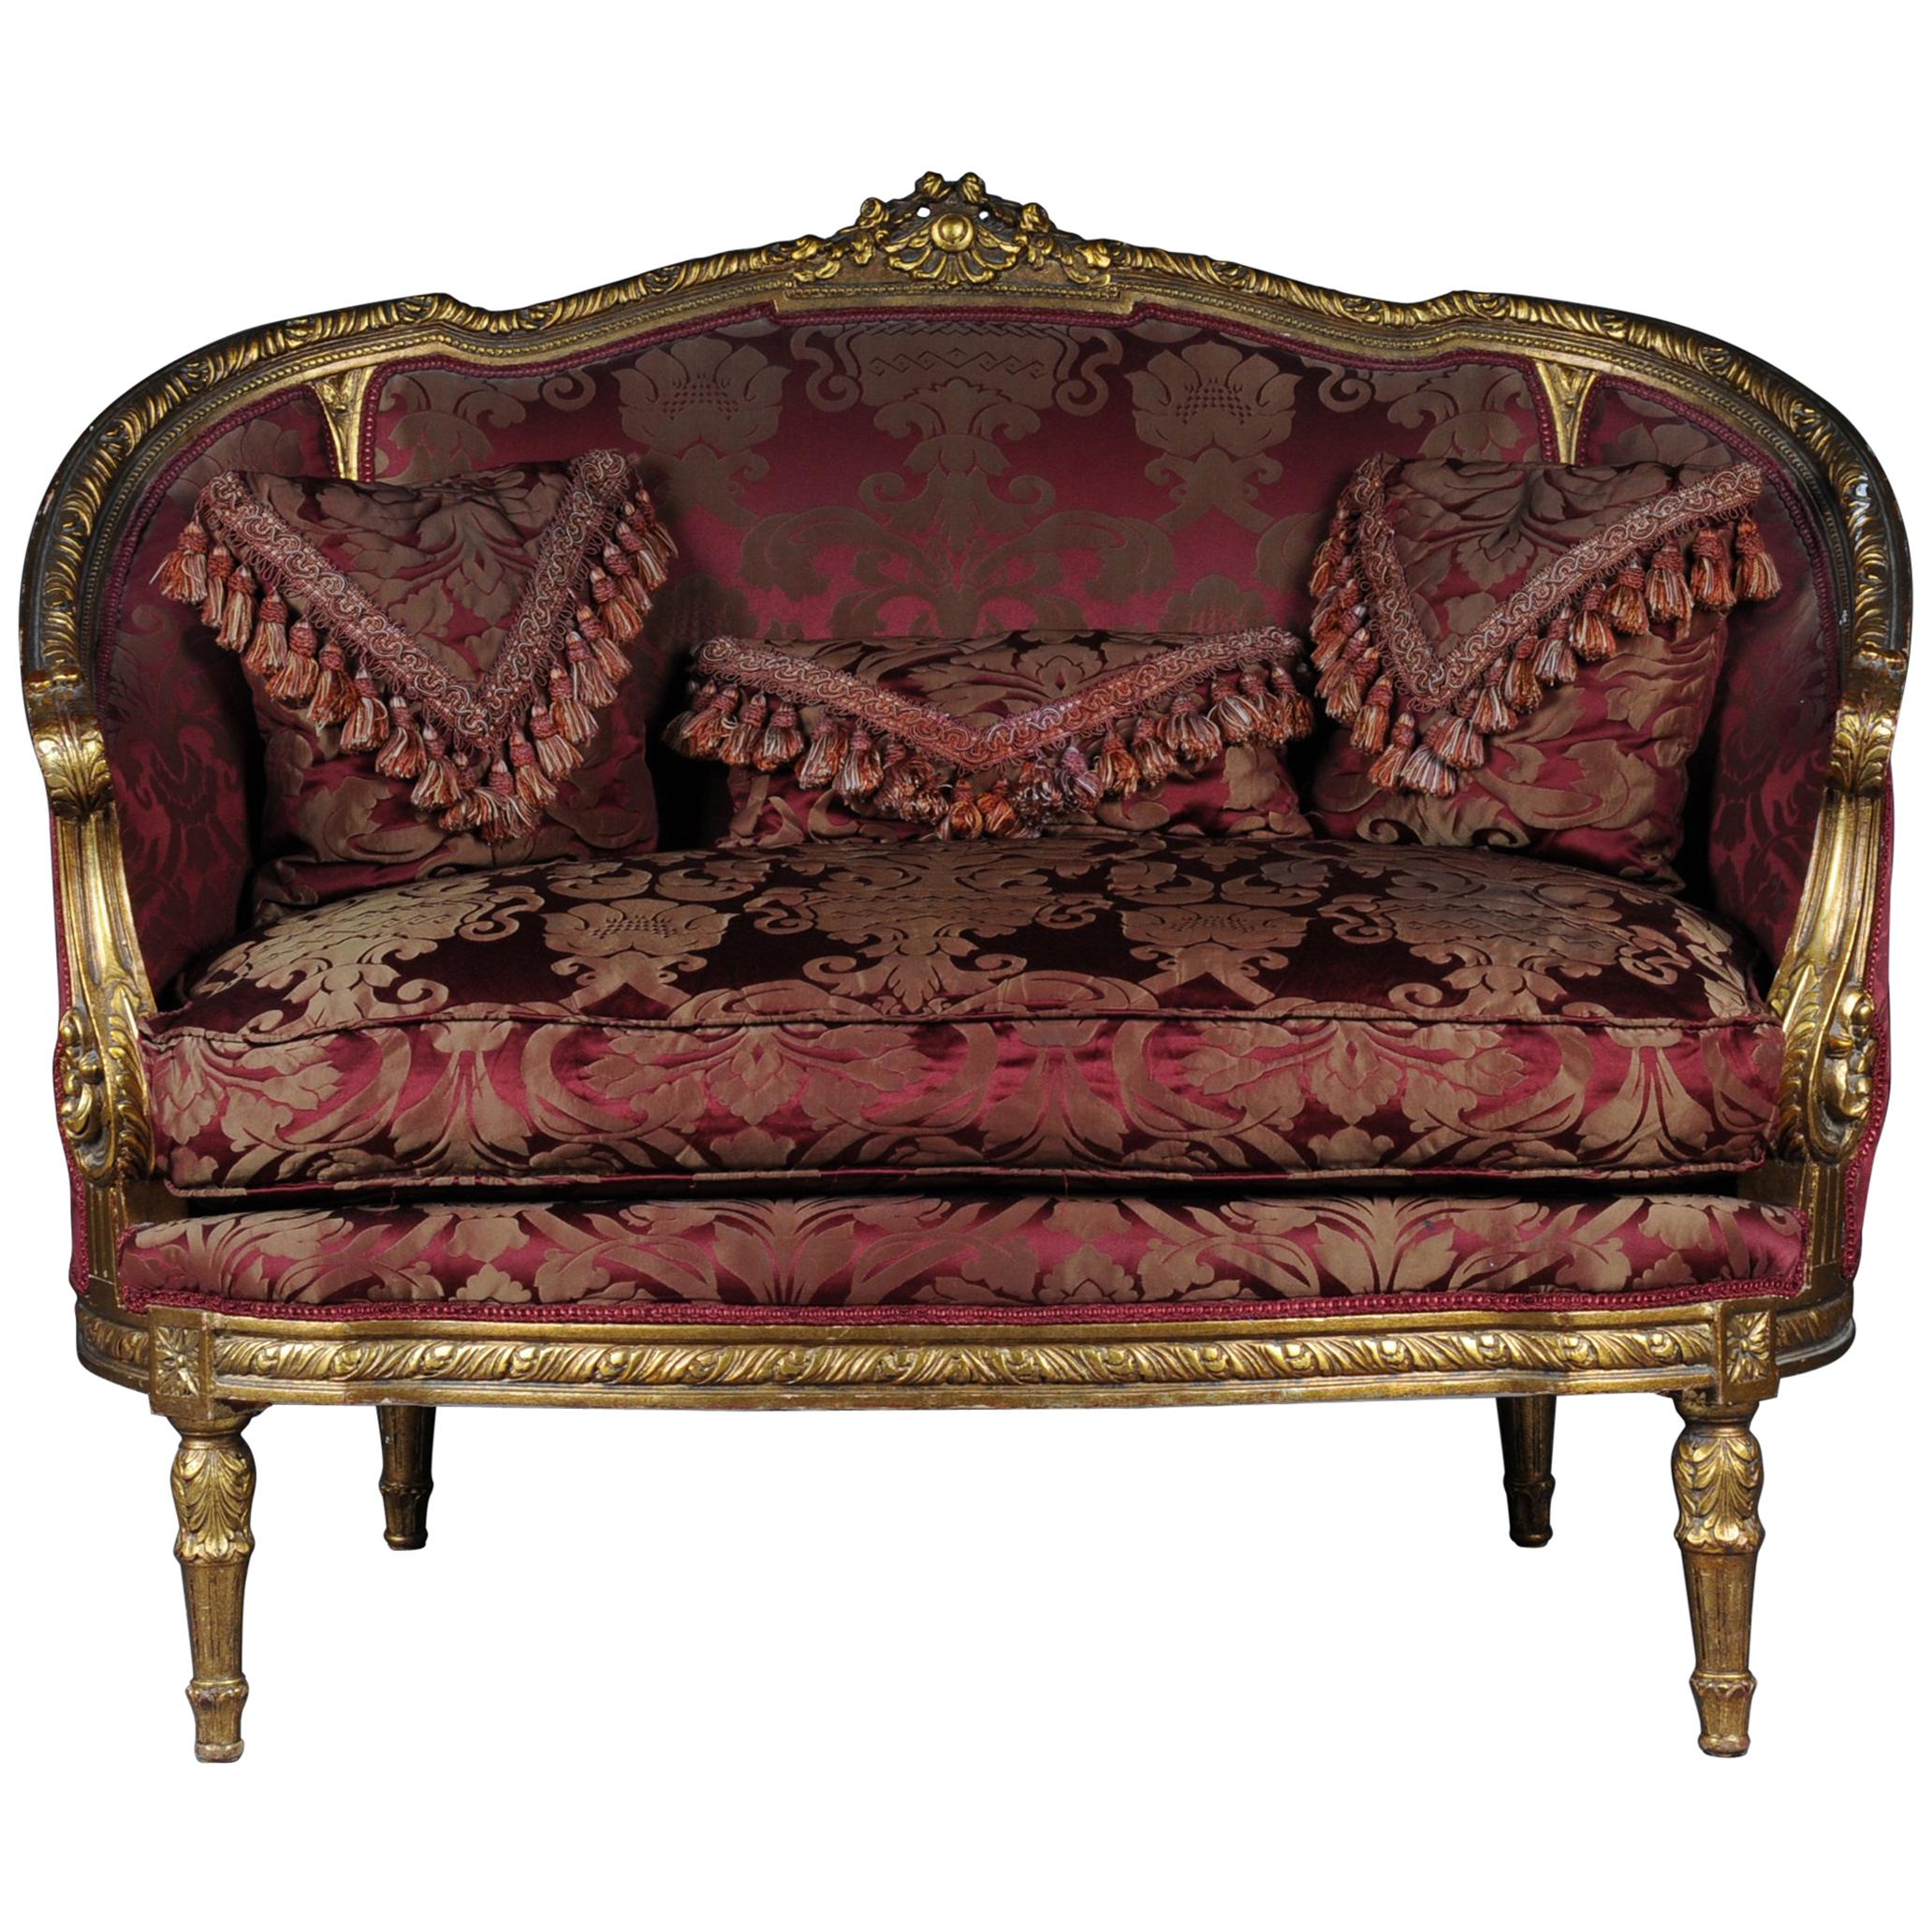 Noble Sofa / Canapes / Couch in Rococo / Louis XVI Style